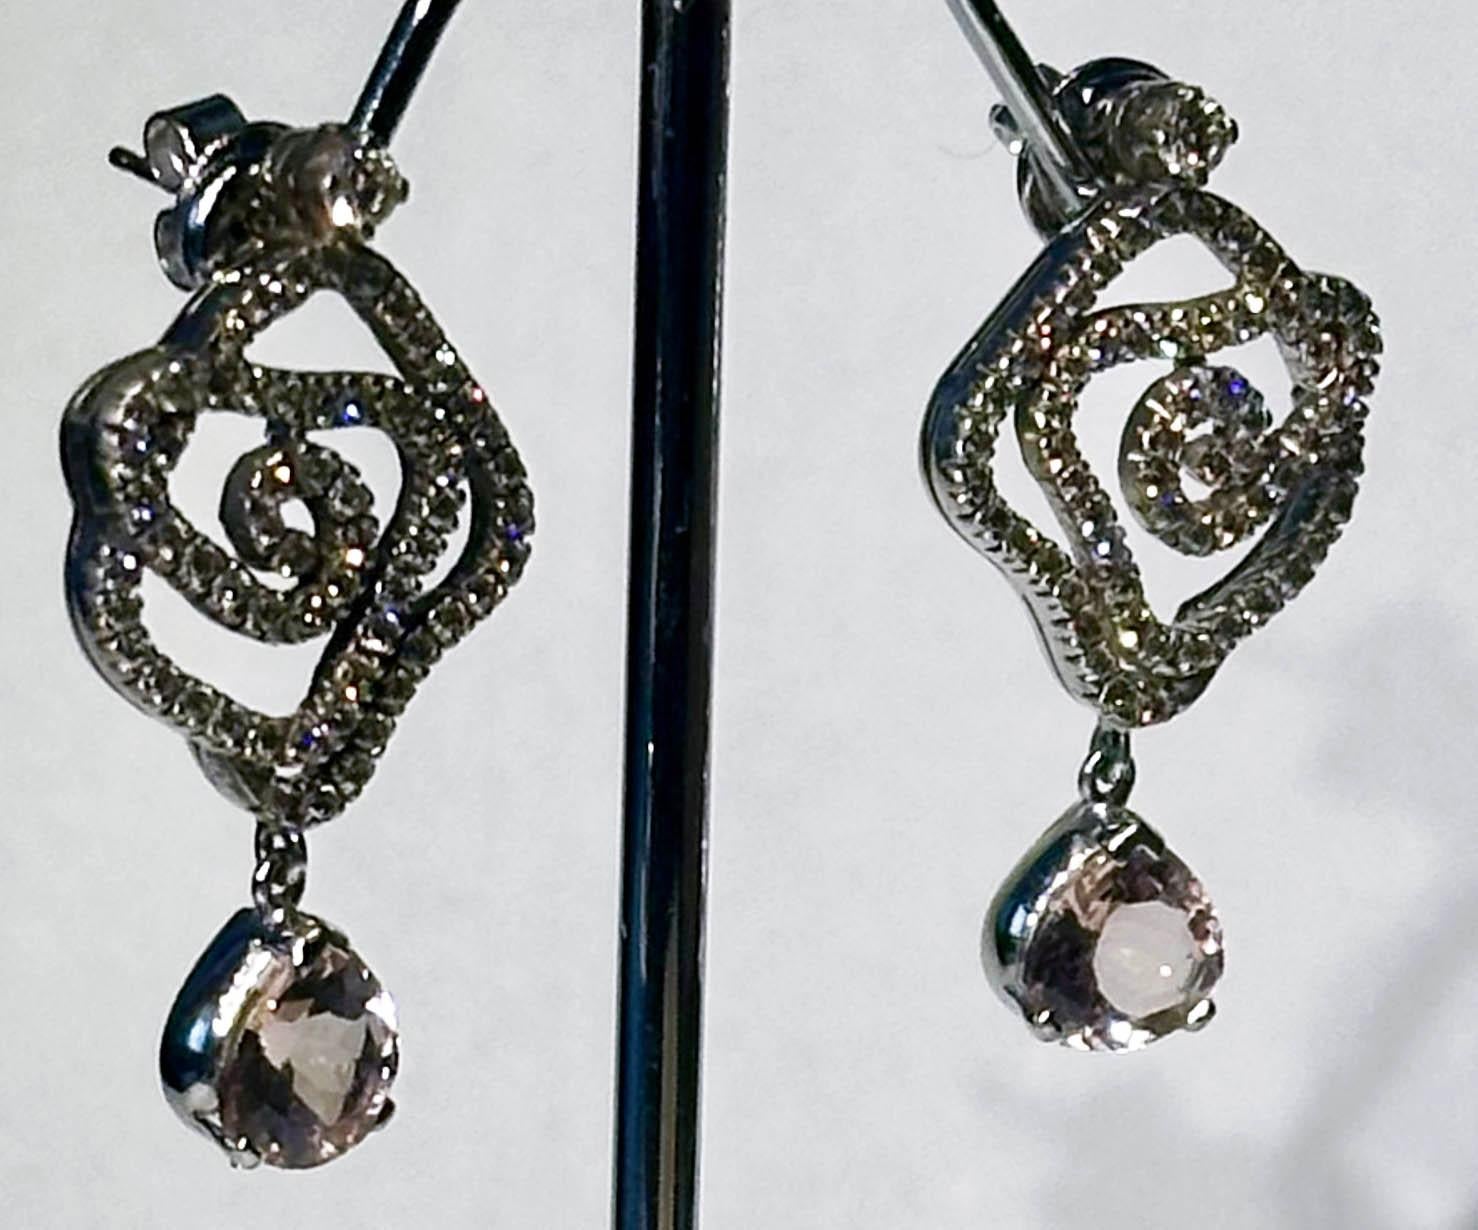 Brilliant Cut A Pair of Blackened 18kt White Gold Diamond Earrings with Morganite Dangles For Sale